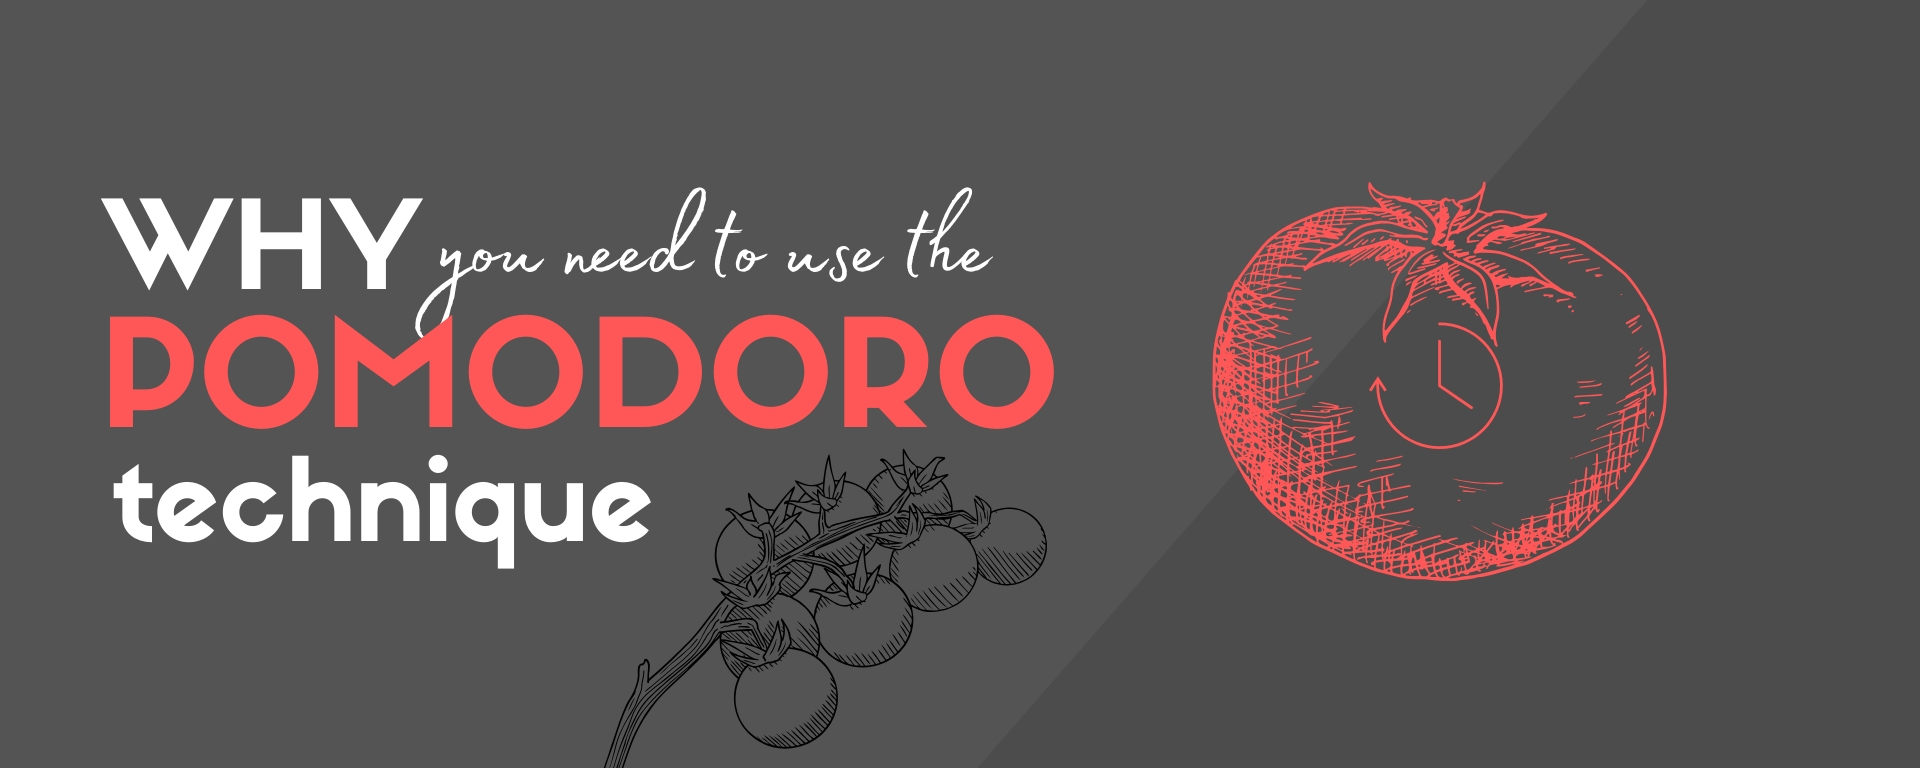 Why You need to use the Pomodoro Technique